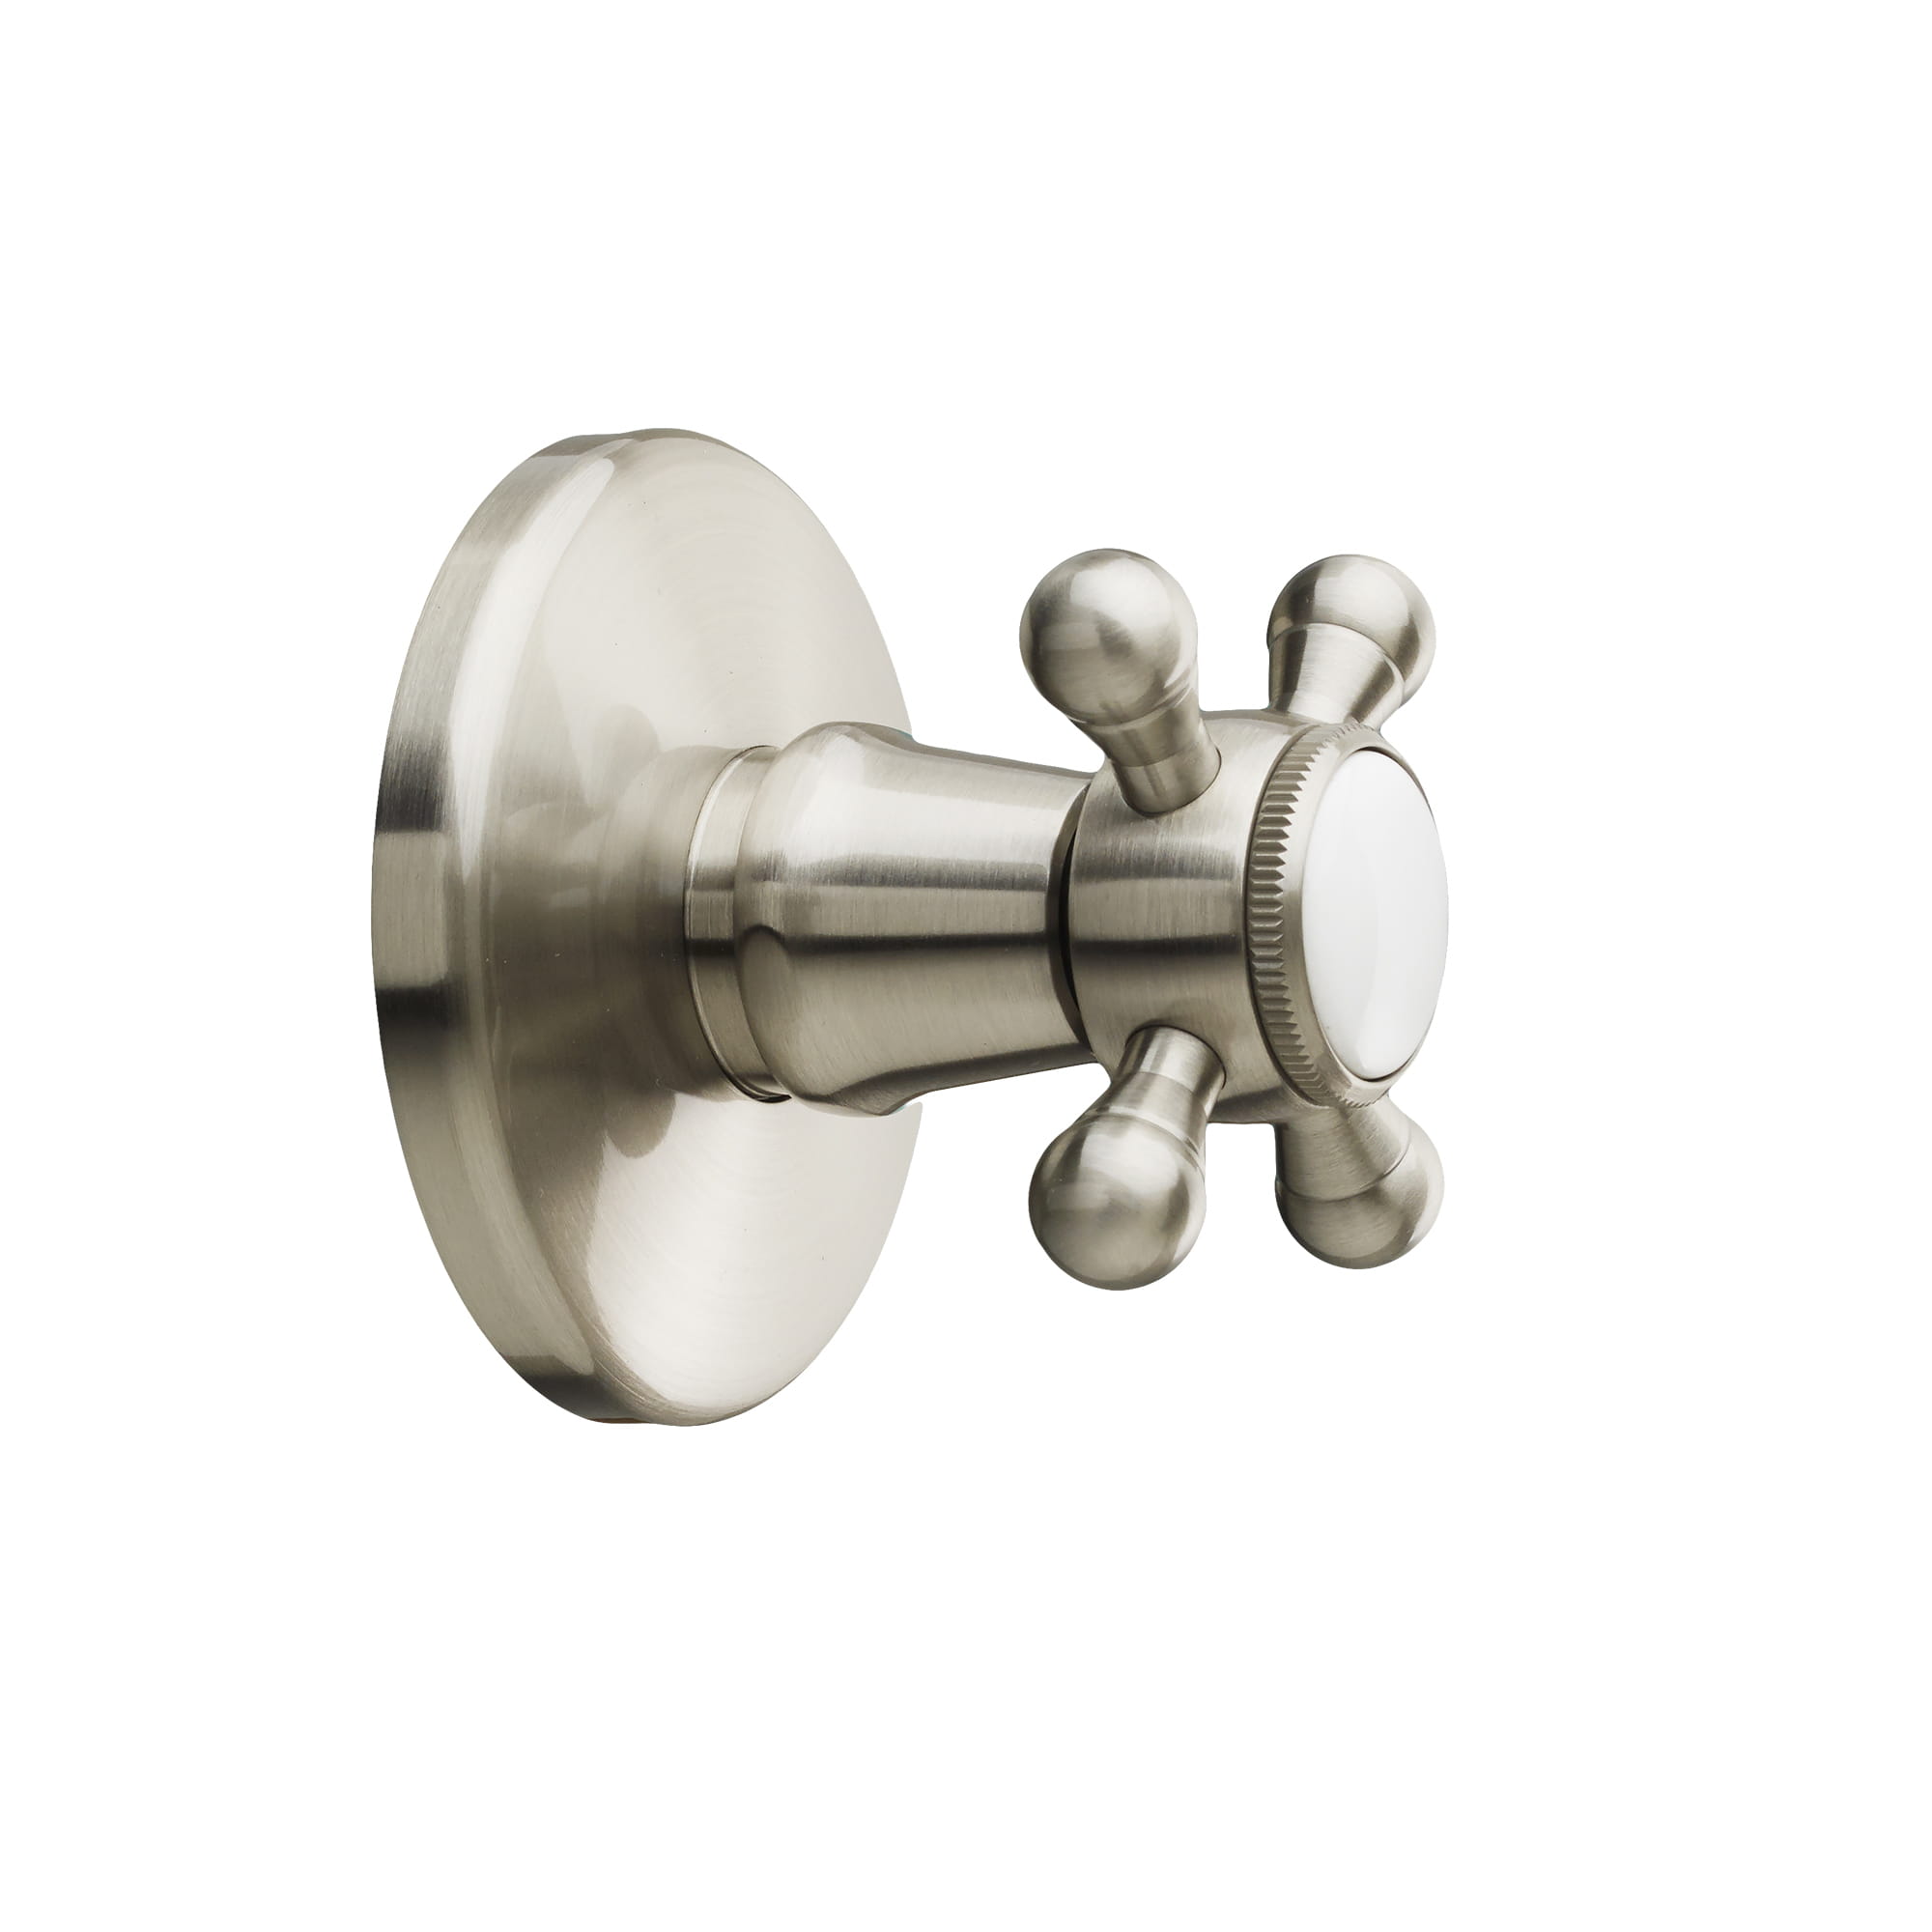 Ashbee® 3/2 or 4/3 Diverter Valve Trim with Cross Handle